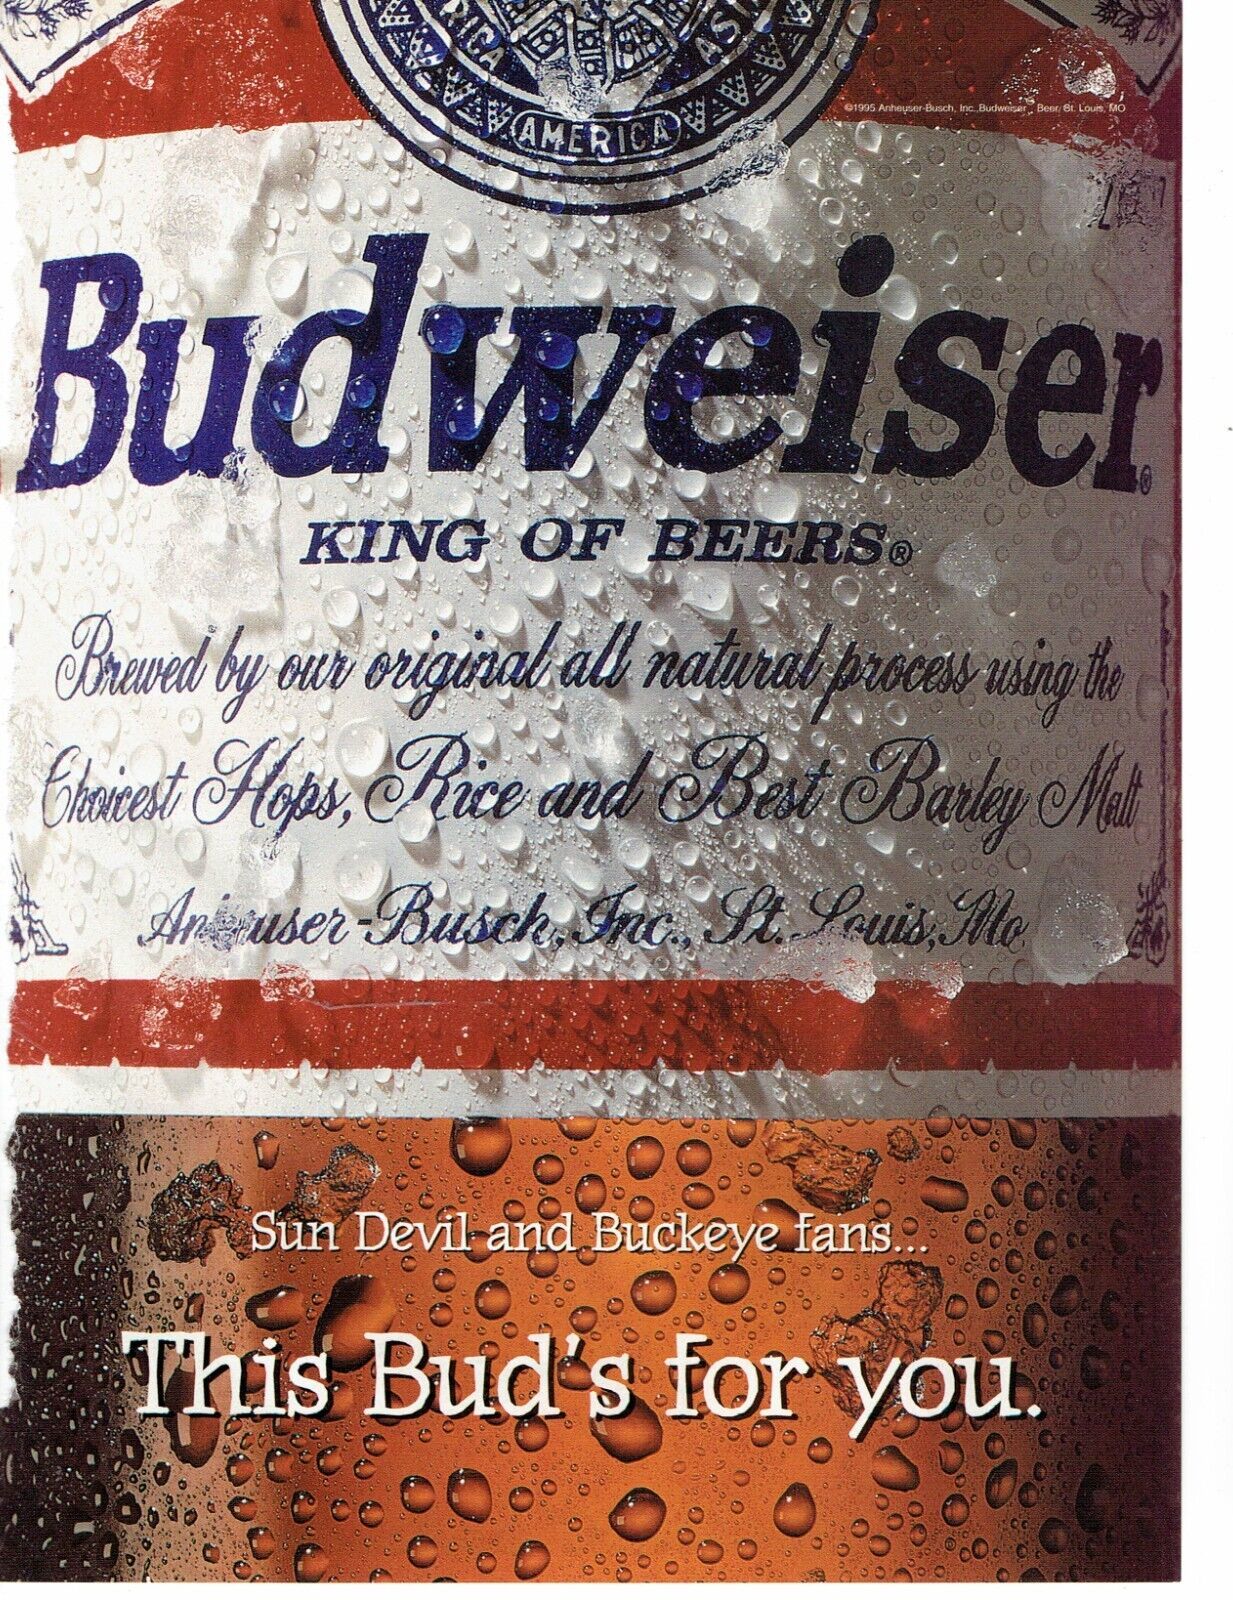 1996 Budweiser Beer Print Ad Vintage This Bud's For you 8.5" x 11" - $19.31